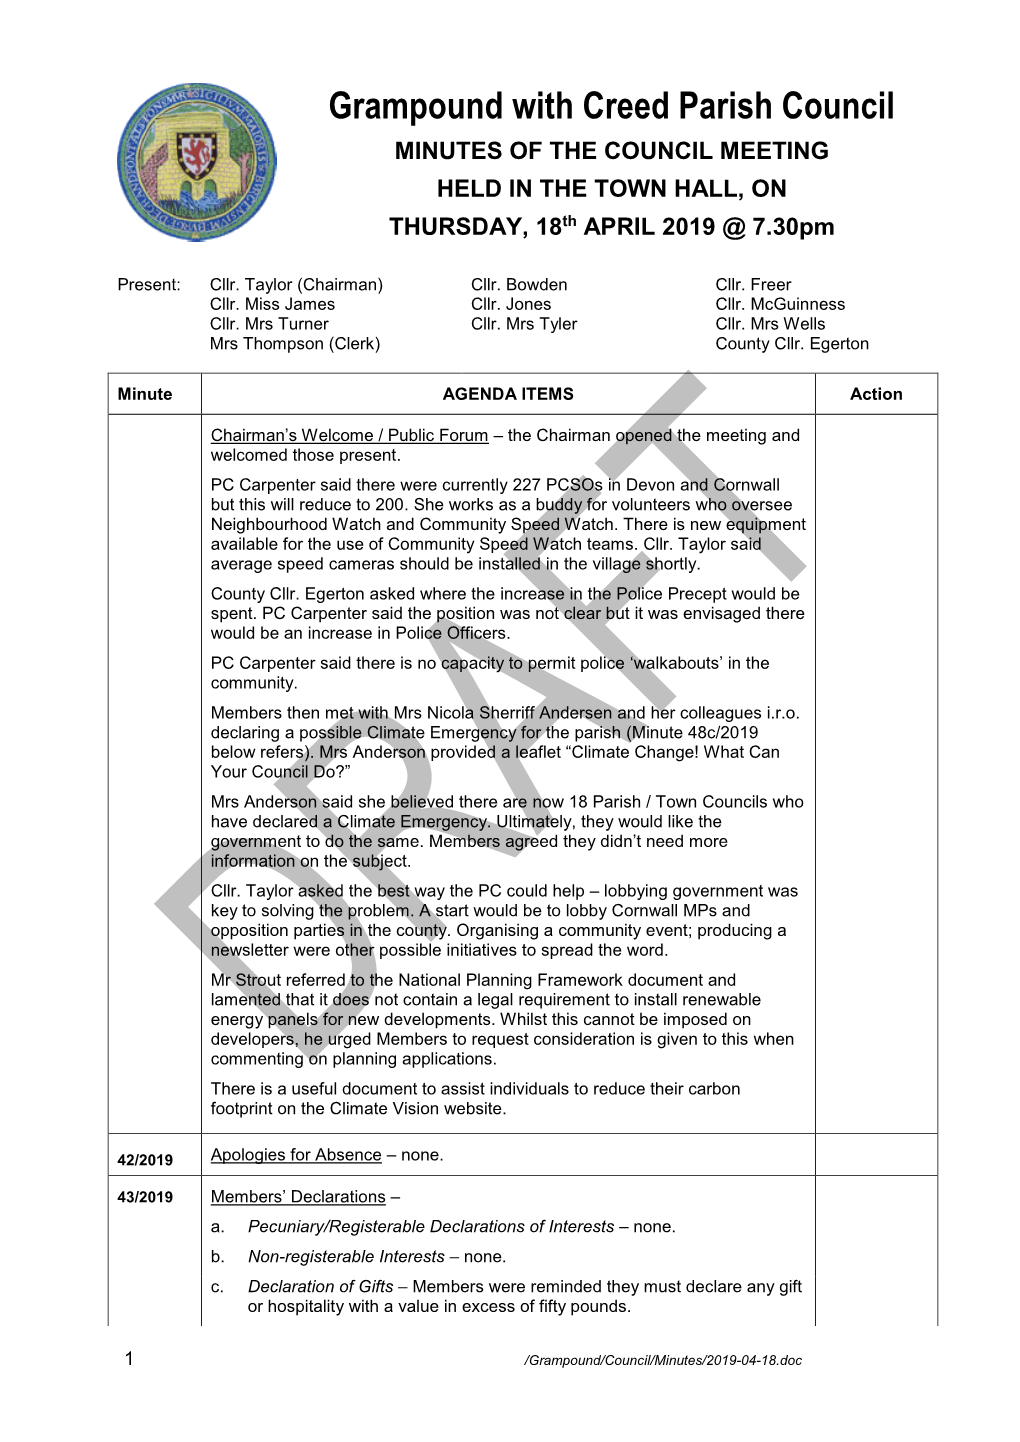 Grampound with Creed Parish Council MINUTES of the COUNCIL MEETING HELD in the TOWN HALL, on Th THURSDAY, 18 APRIL 2019 @ 7.30Pm